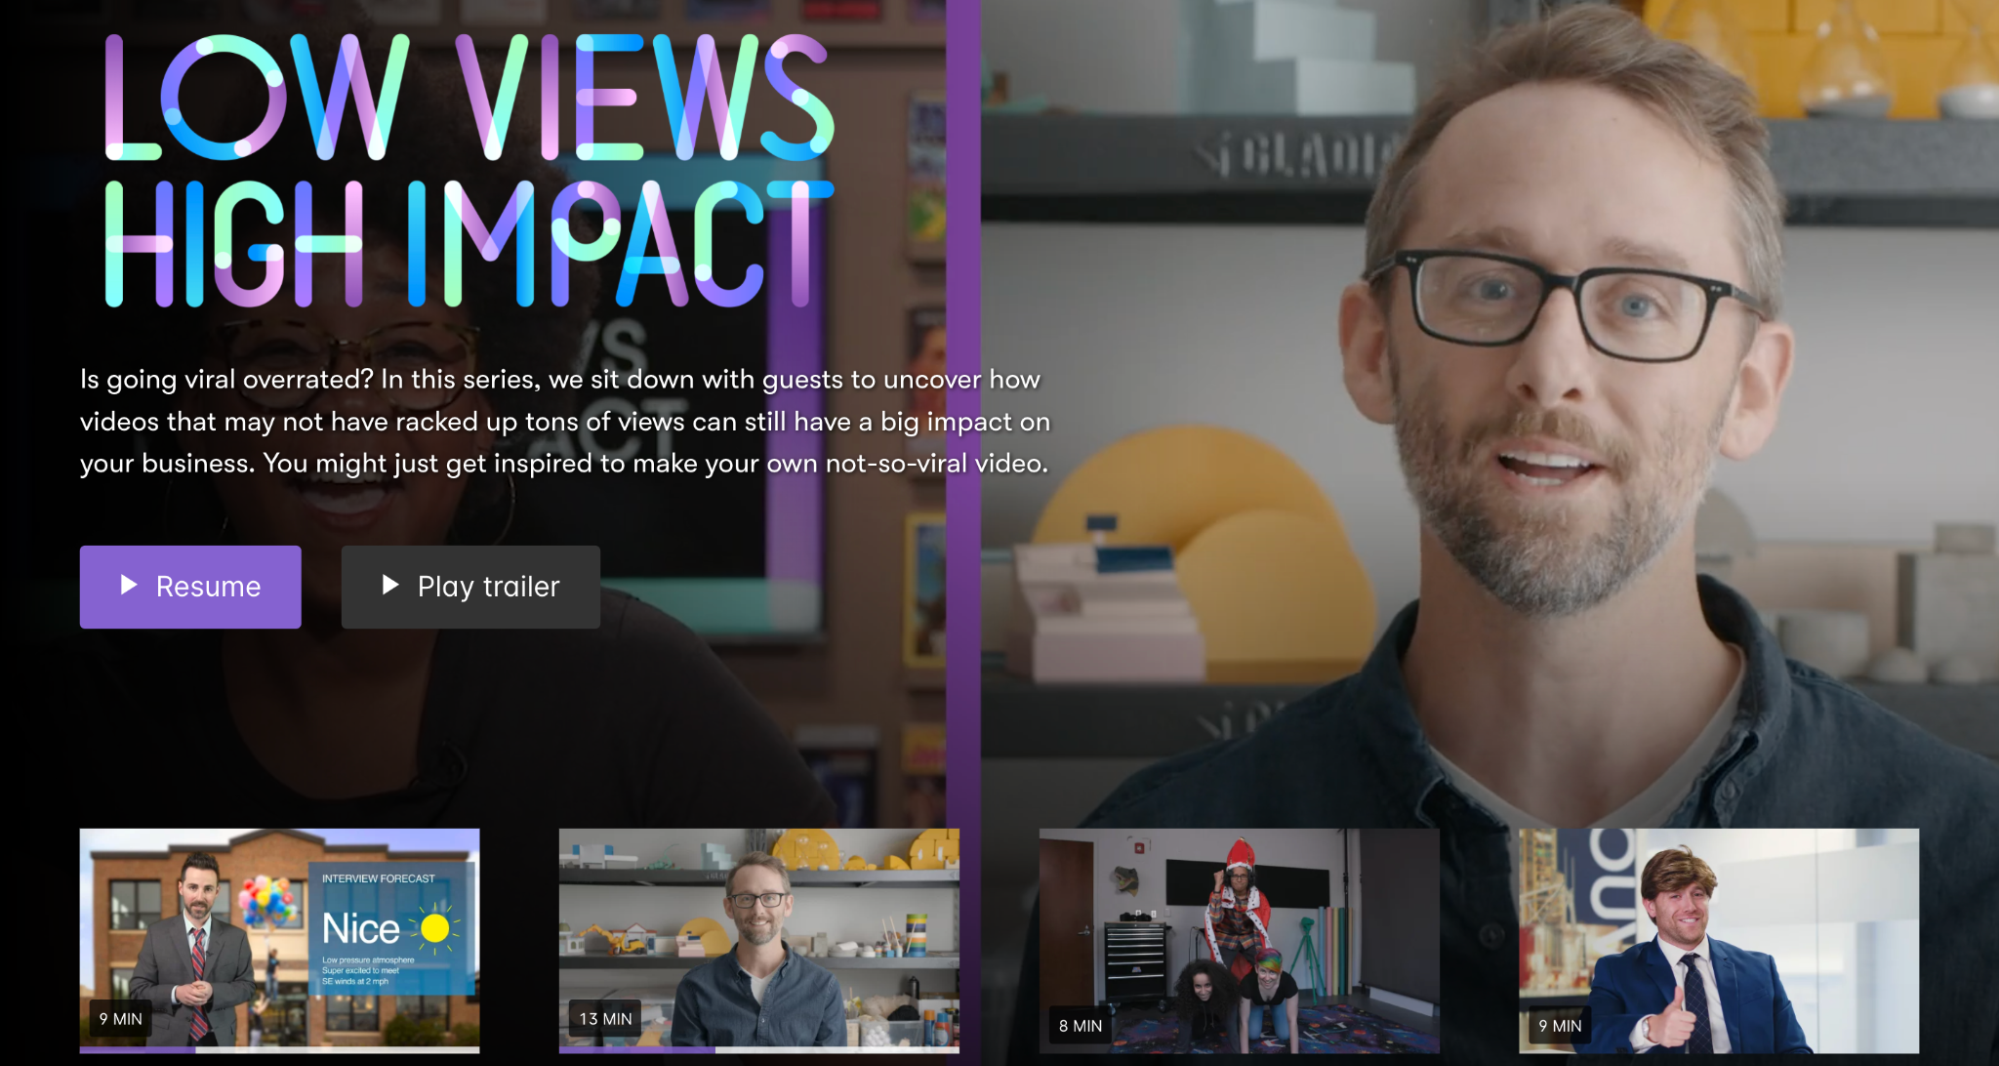 Wistia’s homepage for their “Low Views High Impact” campaign showcases a series of thumbnails and still images featuring guests looking to improve their video advertising strategies. The description for the page reads, “Is going viral overrated? In this series, we sit down with guests to uncover how videos that may not have racked up tons of views can still have a big impact on your business. You might just get inspired to make your own not-so-viral video.” There are two buttons to “Play” the video and “Play trailer.” 